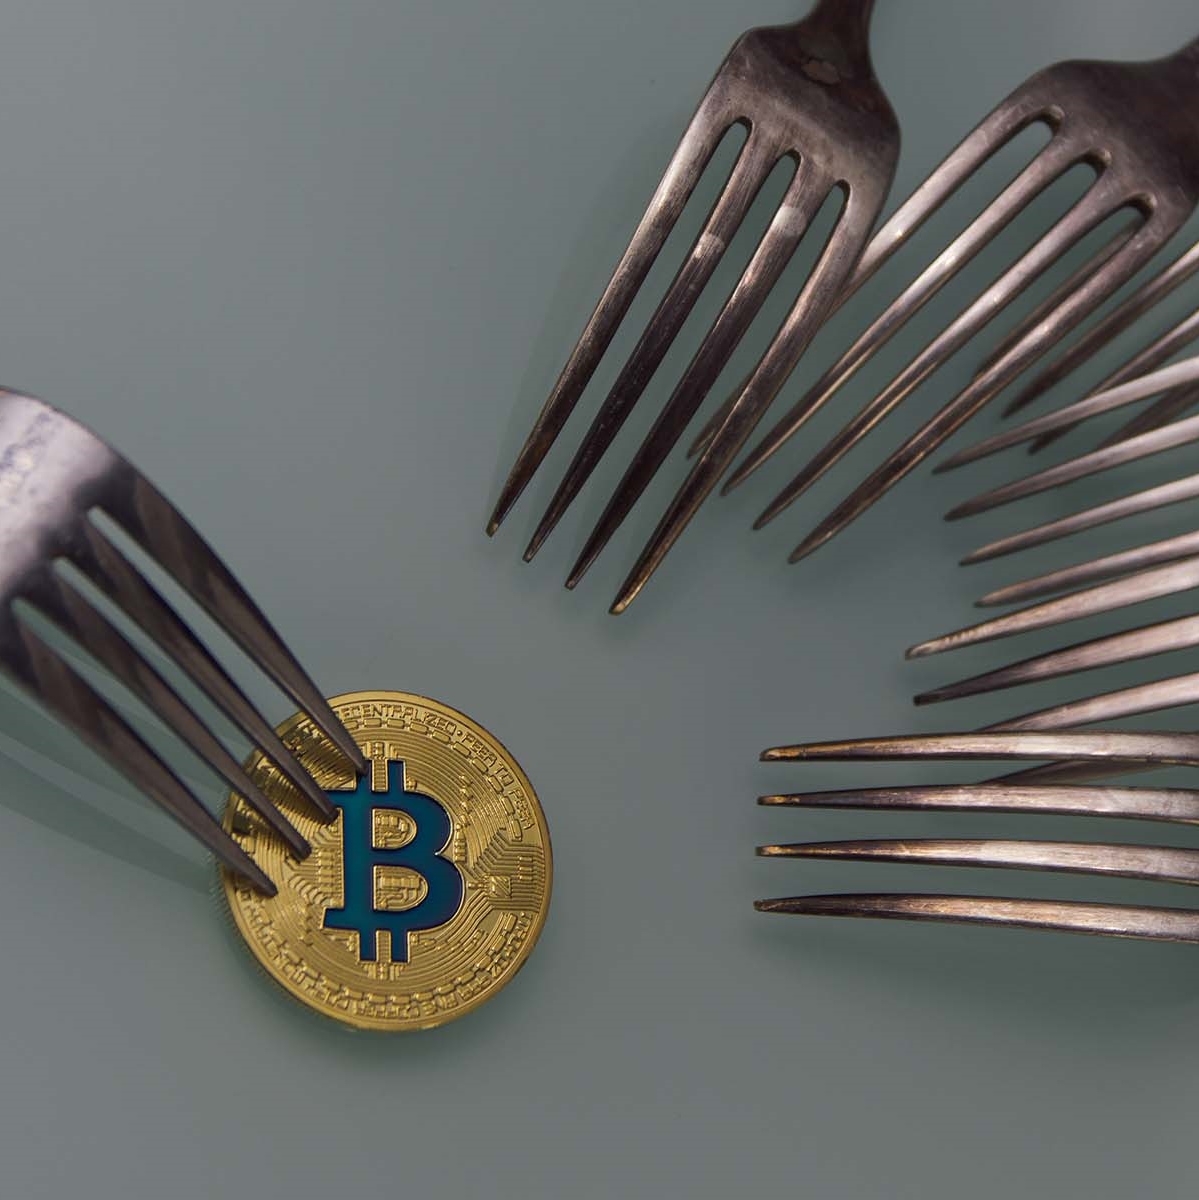 What are bitcoin forks and how do they work?